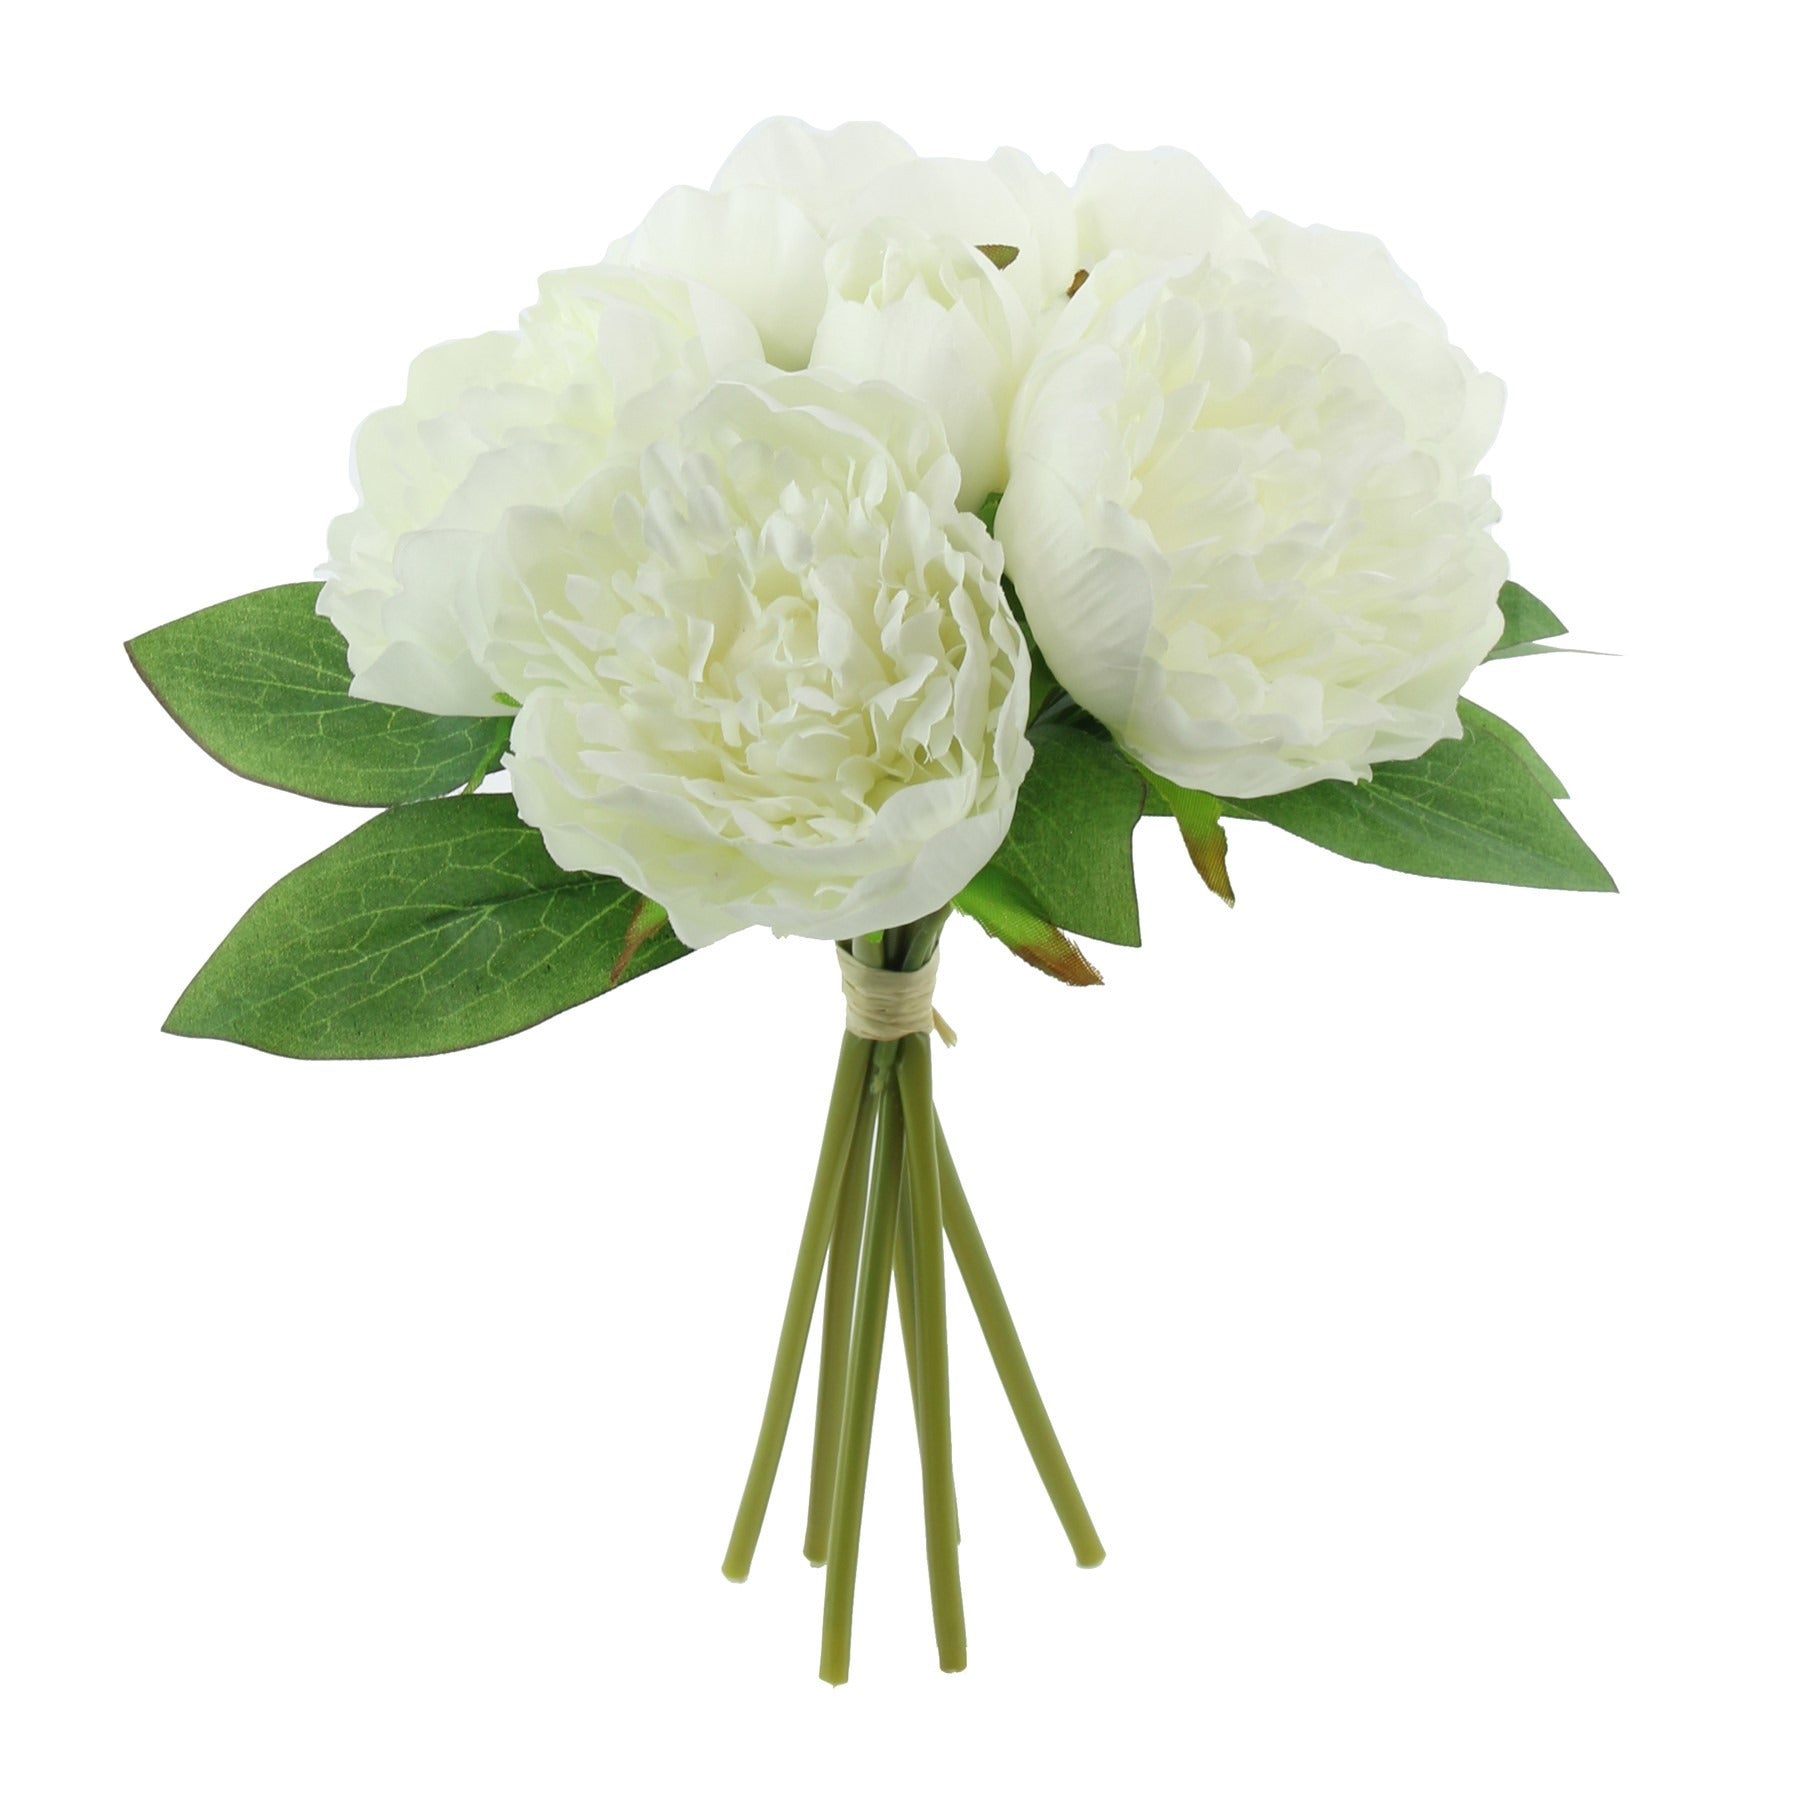 View Ivory Arundel Peony Bouquet information